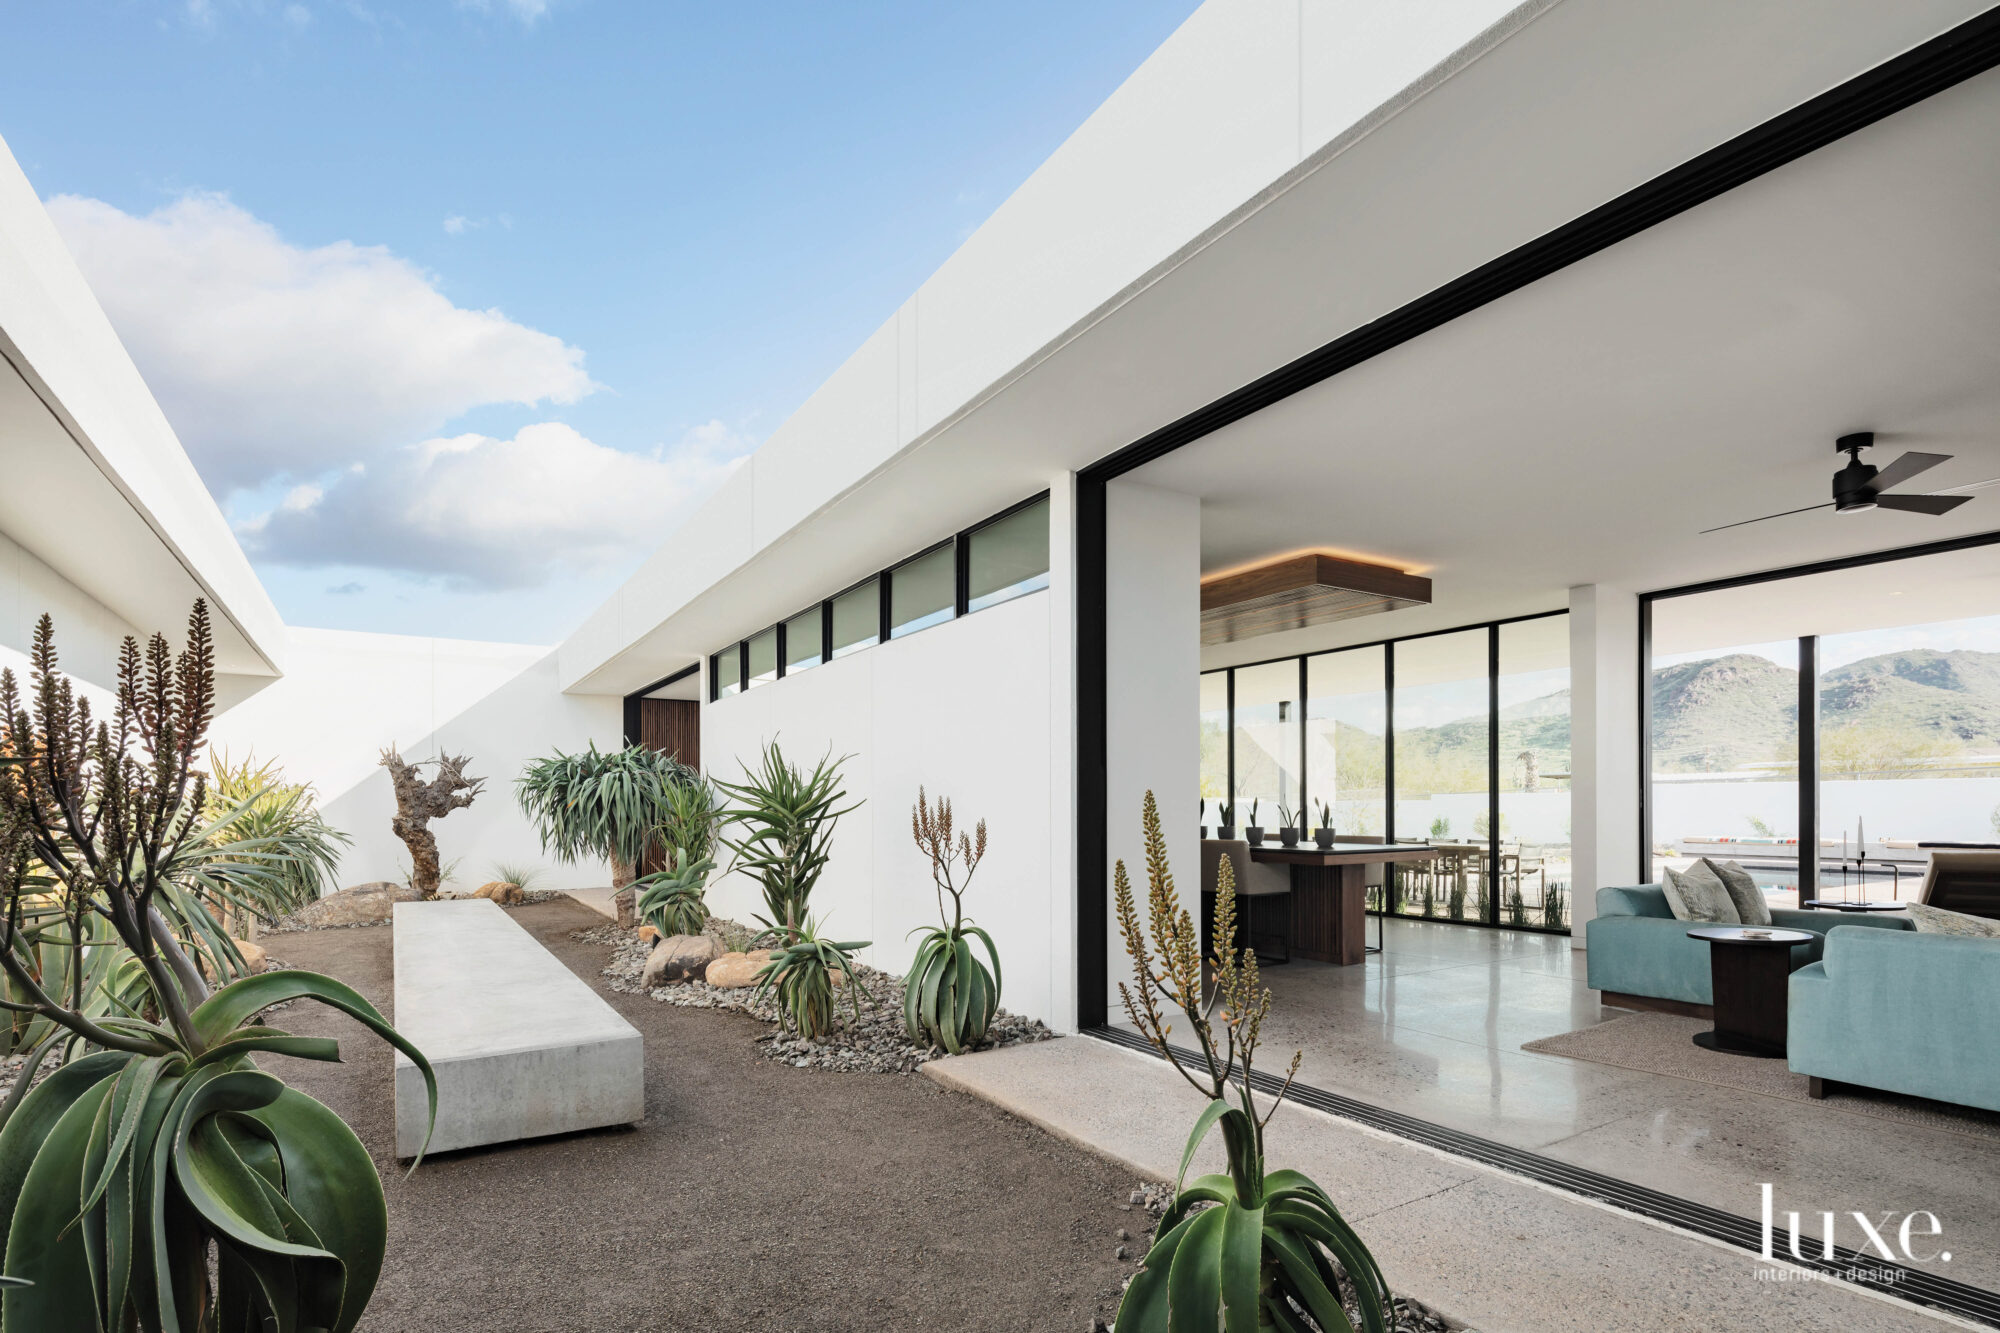 The living room opens up to the courtyard that has native desert plants.